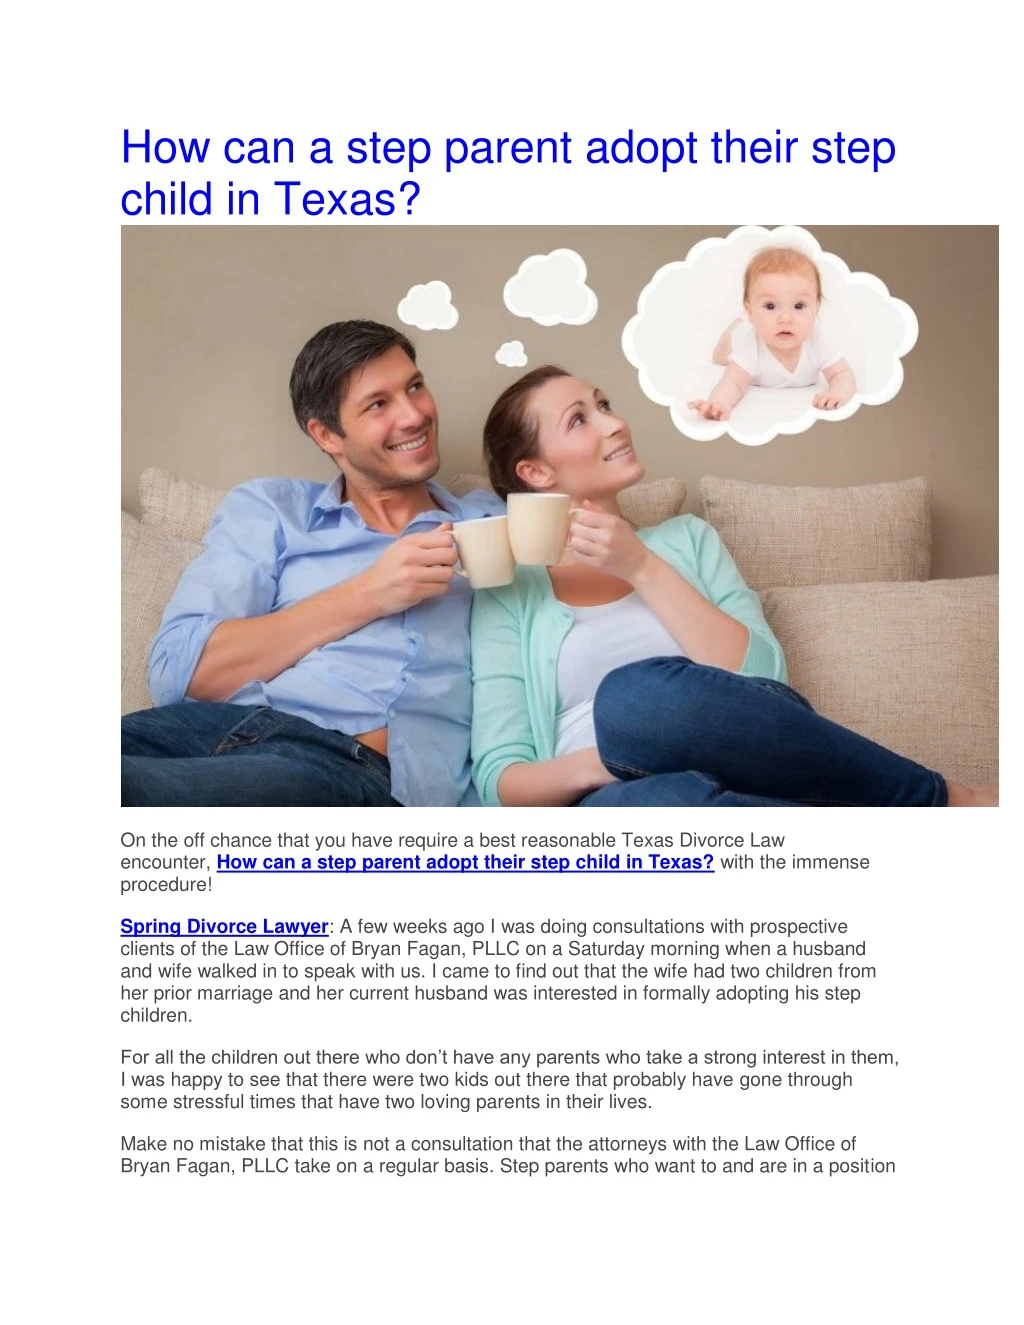 how can a step parent adopt their step child